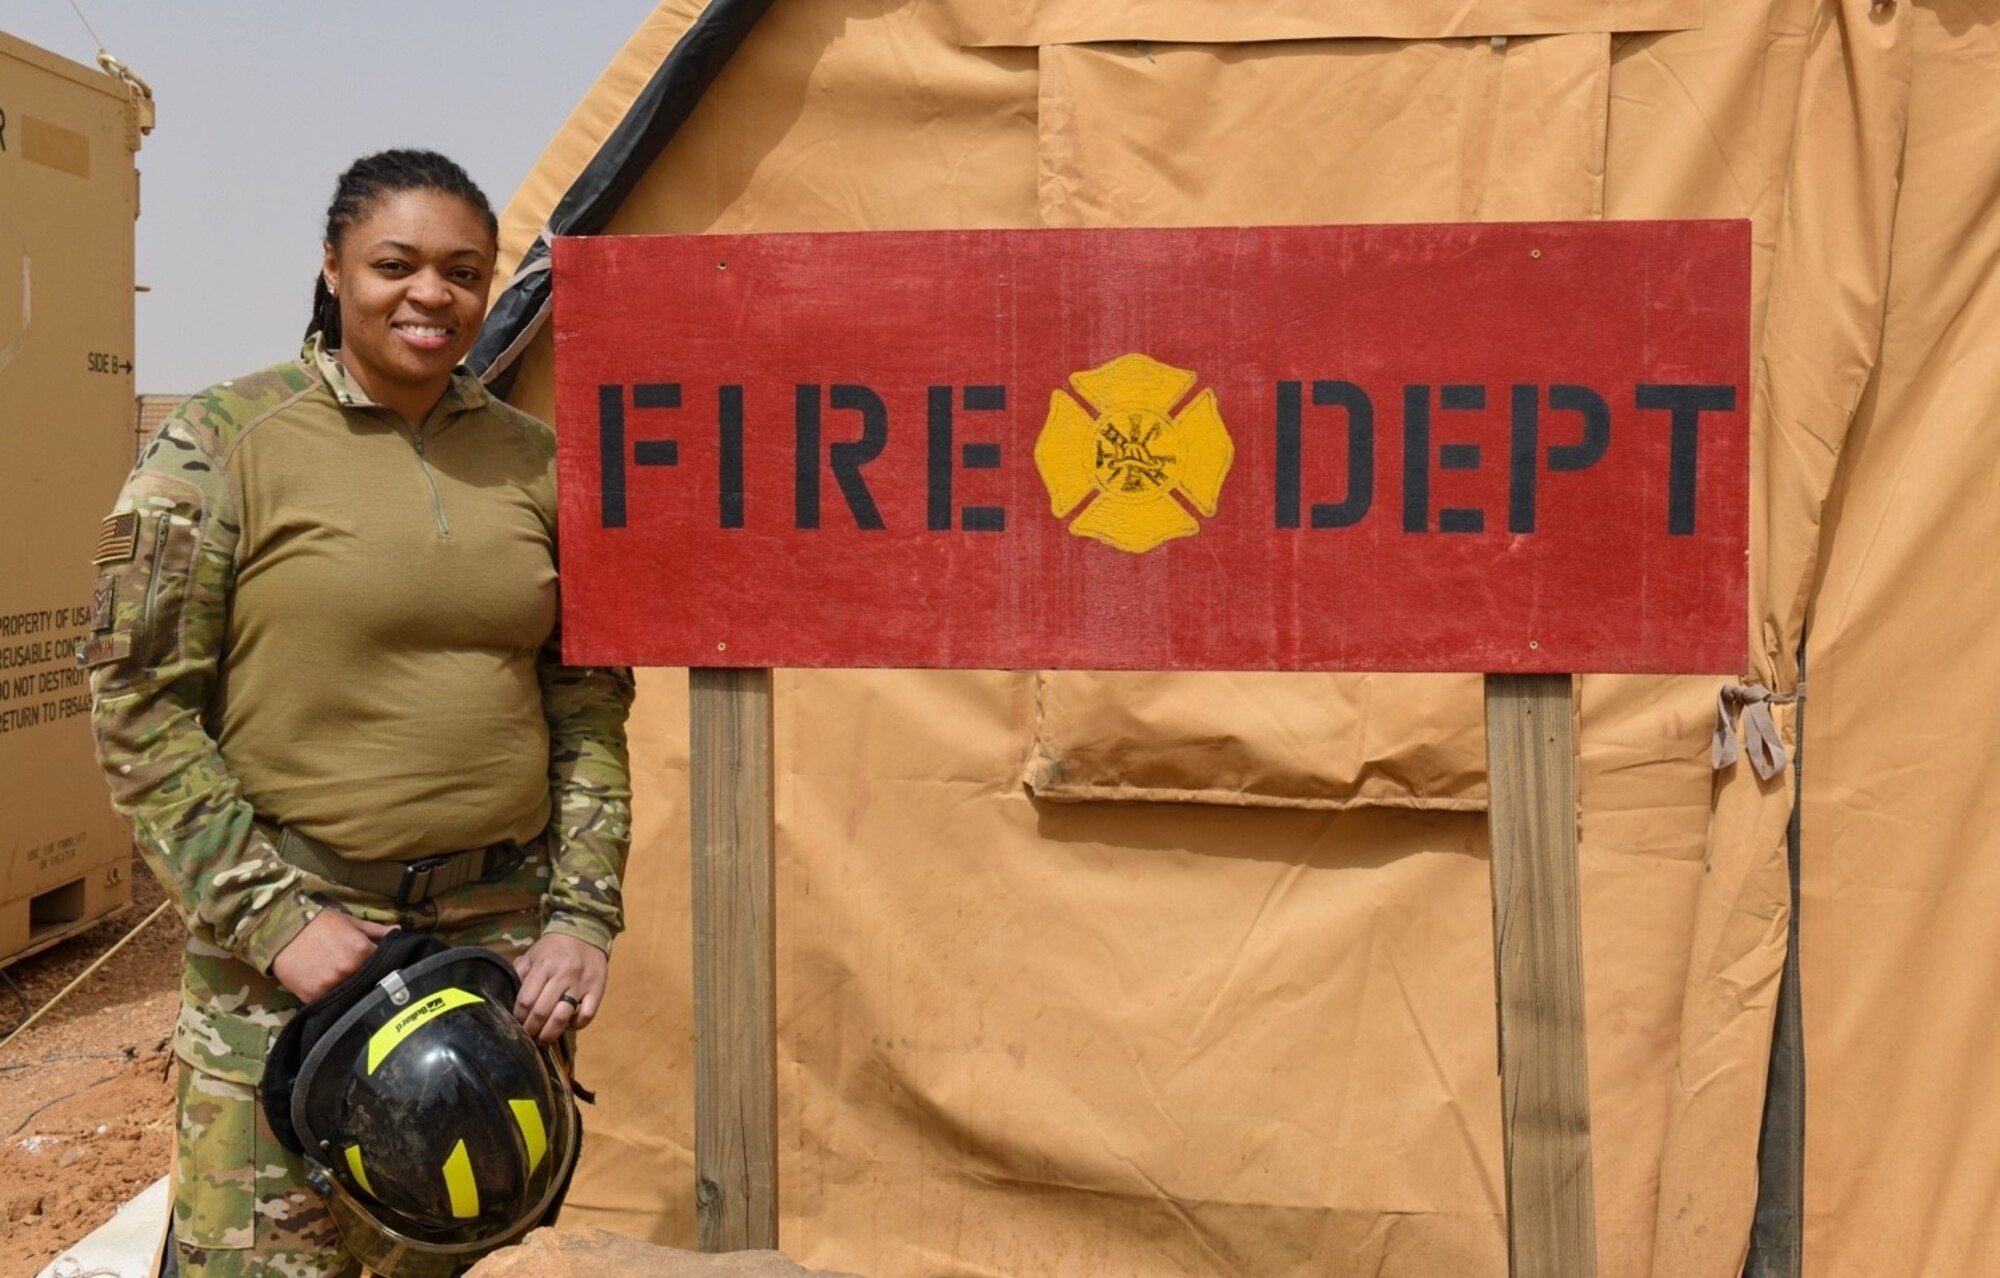 U.S. Air Force Senior Airman Shatora Dunkin, 724th Expeditionary Air Base Squadron firefighter, poses for a photo in support of Women’s History Month at Nigerien Air Base 201, Agadez, Niger, March 4, 2021. Dunkin’s duties entail being a structural and crash vehicles driver operator as well as a dispatcher for all emergency calls. She joined the Air Force for stability and educational benefits. Her goals are obtaining her bachelor’s degree in healthcare administration and becoming the first female fire chief in her section. (U.S. Air Force photo by Senior Airman Gabrielle Winn)